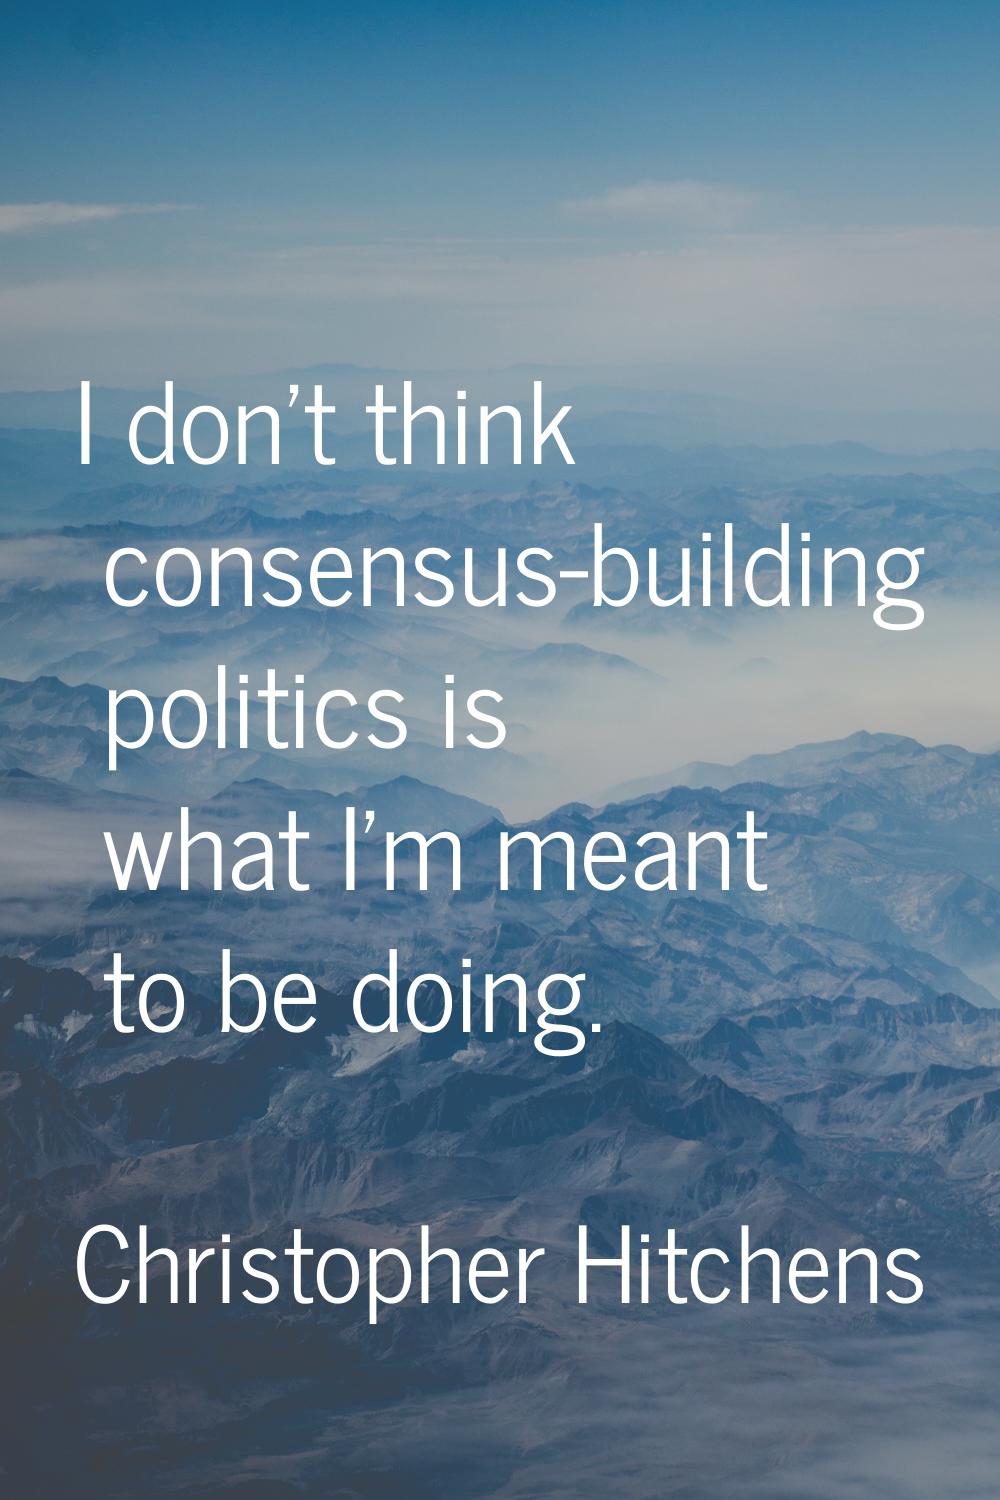 I don't think consensus-building politics is what I'm meant to be doing.